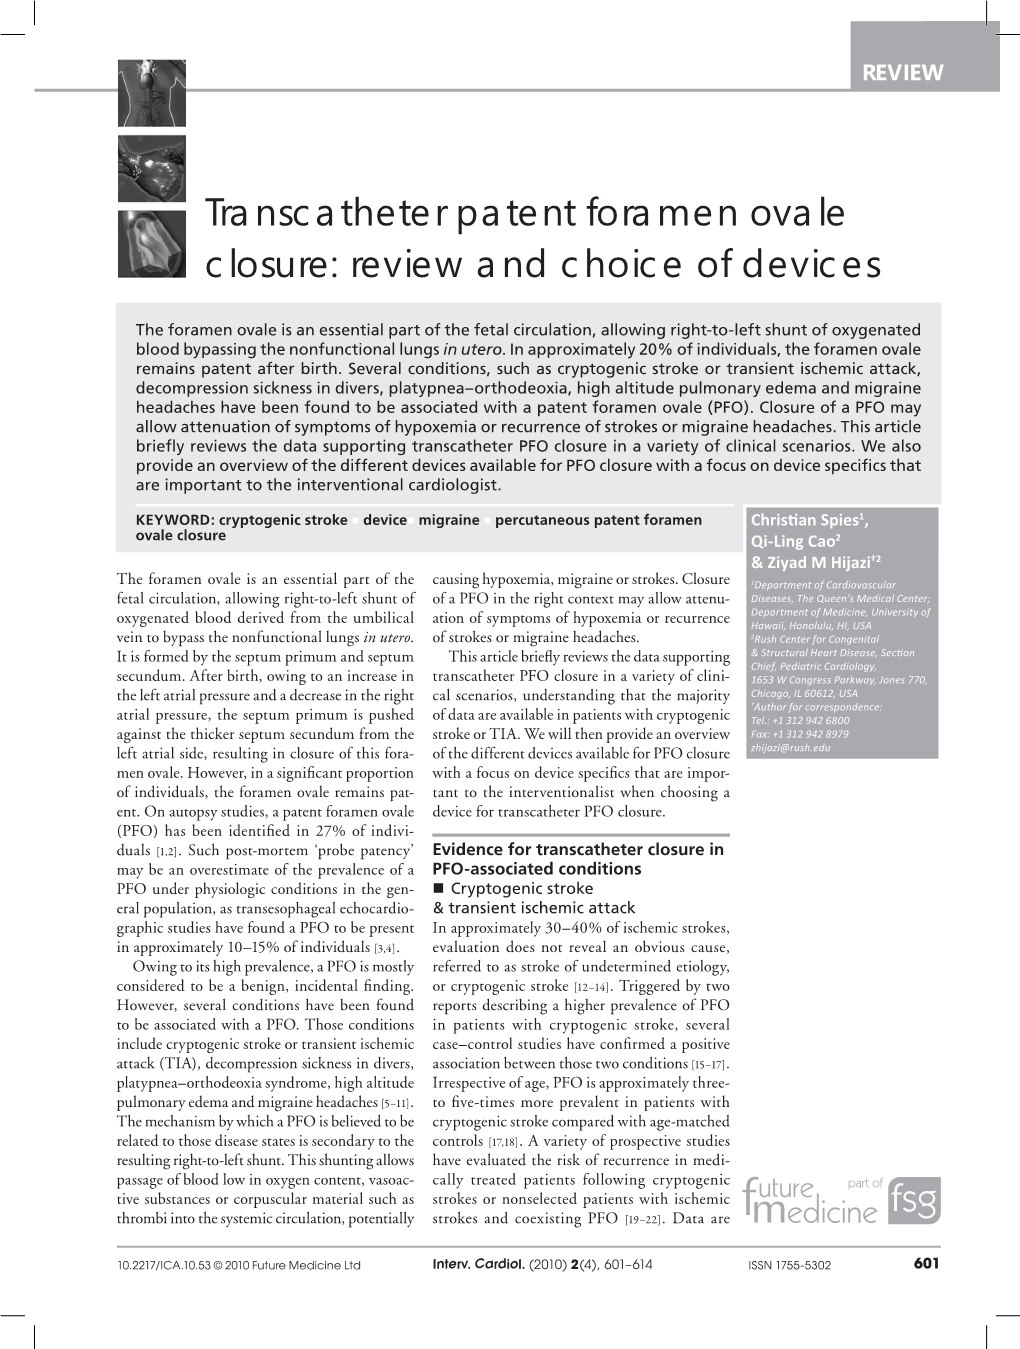 Transcatheter Patent Foramen Ovale Closure: Review and Choice of Devices